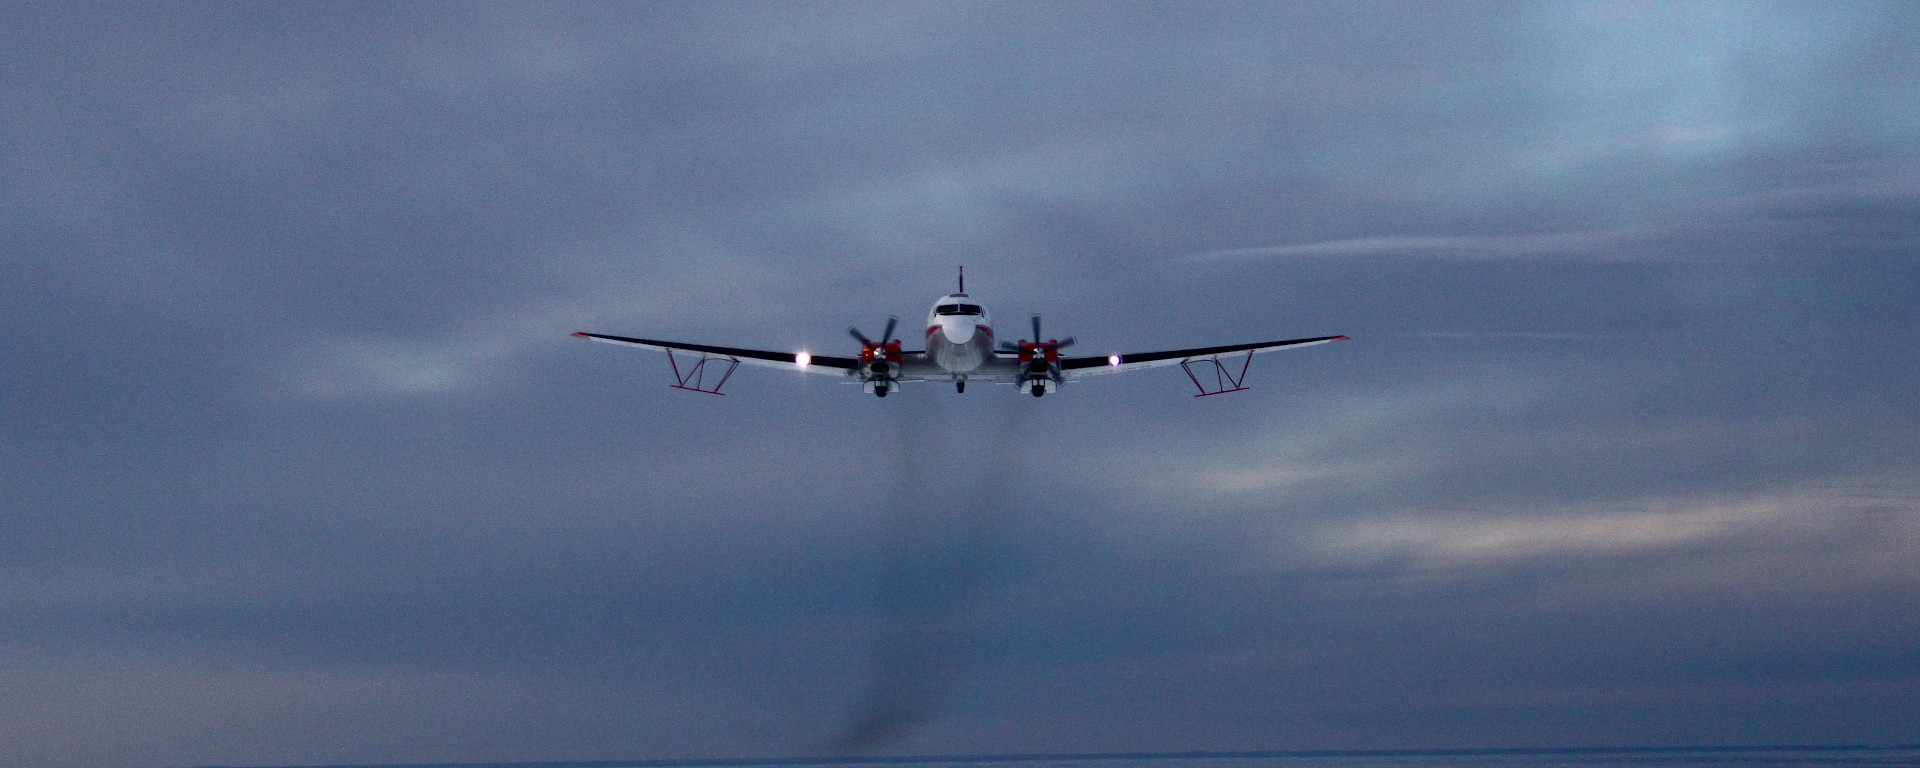 The Basler BT-67 aircraft with wing-mounted ice penetrating radar antennae.